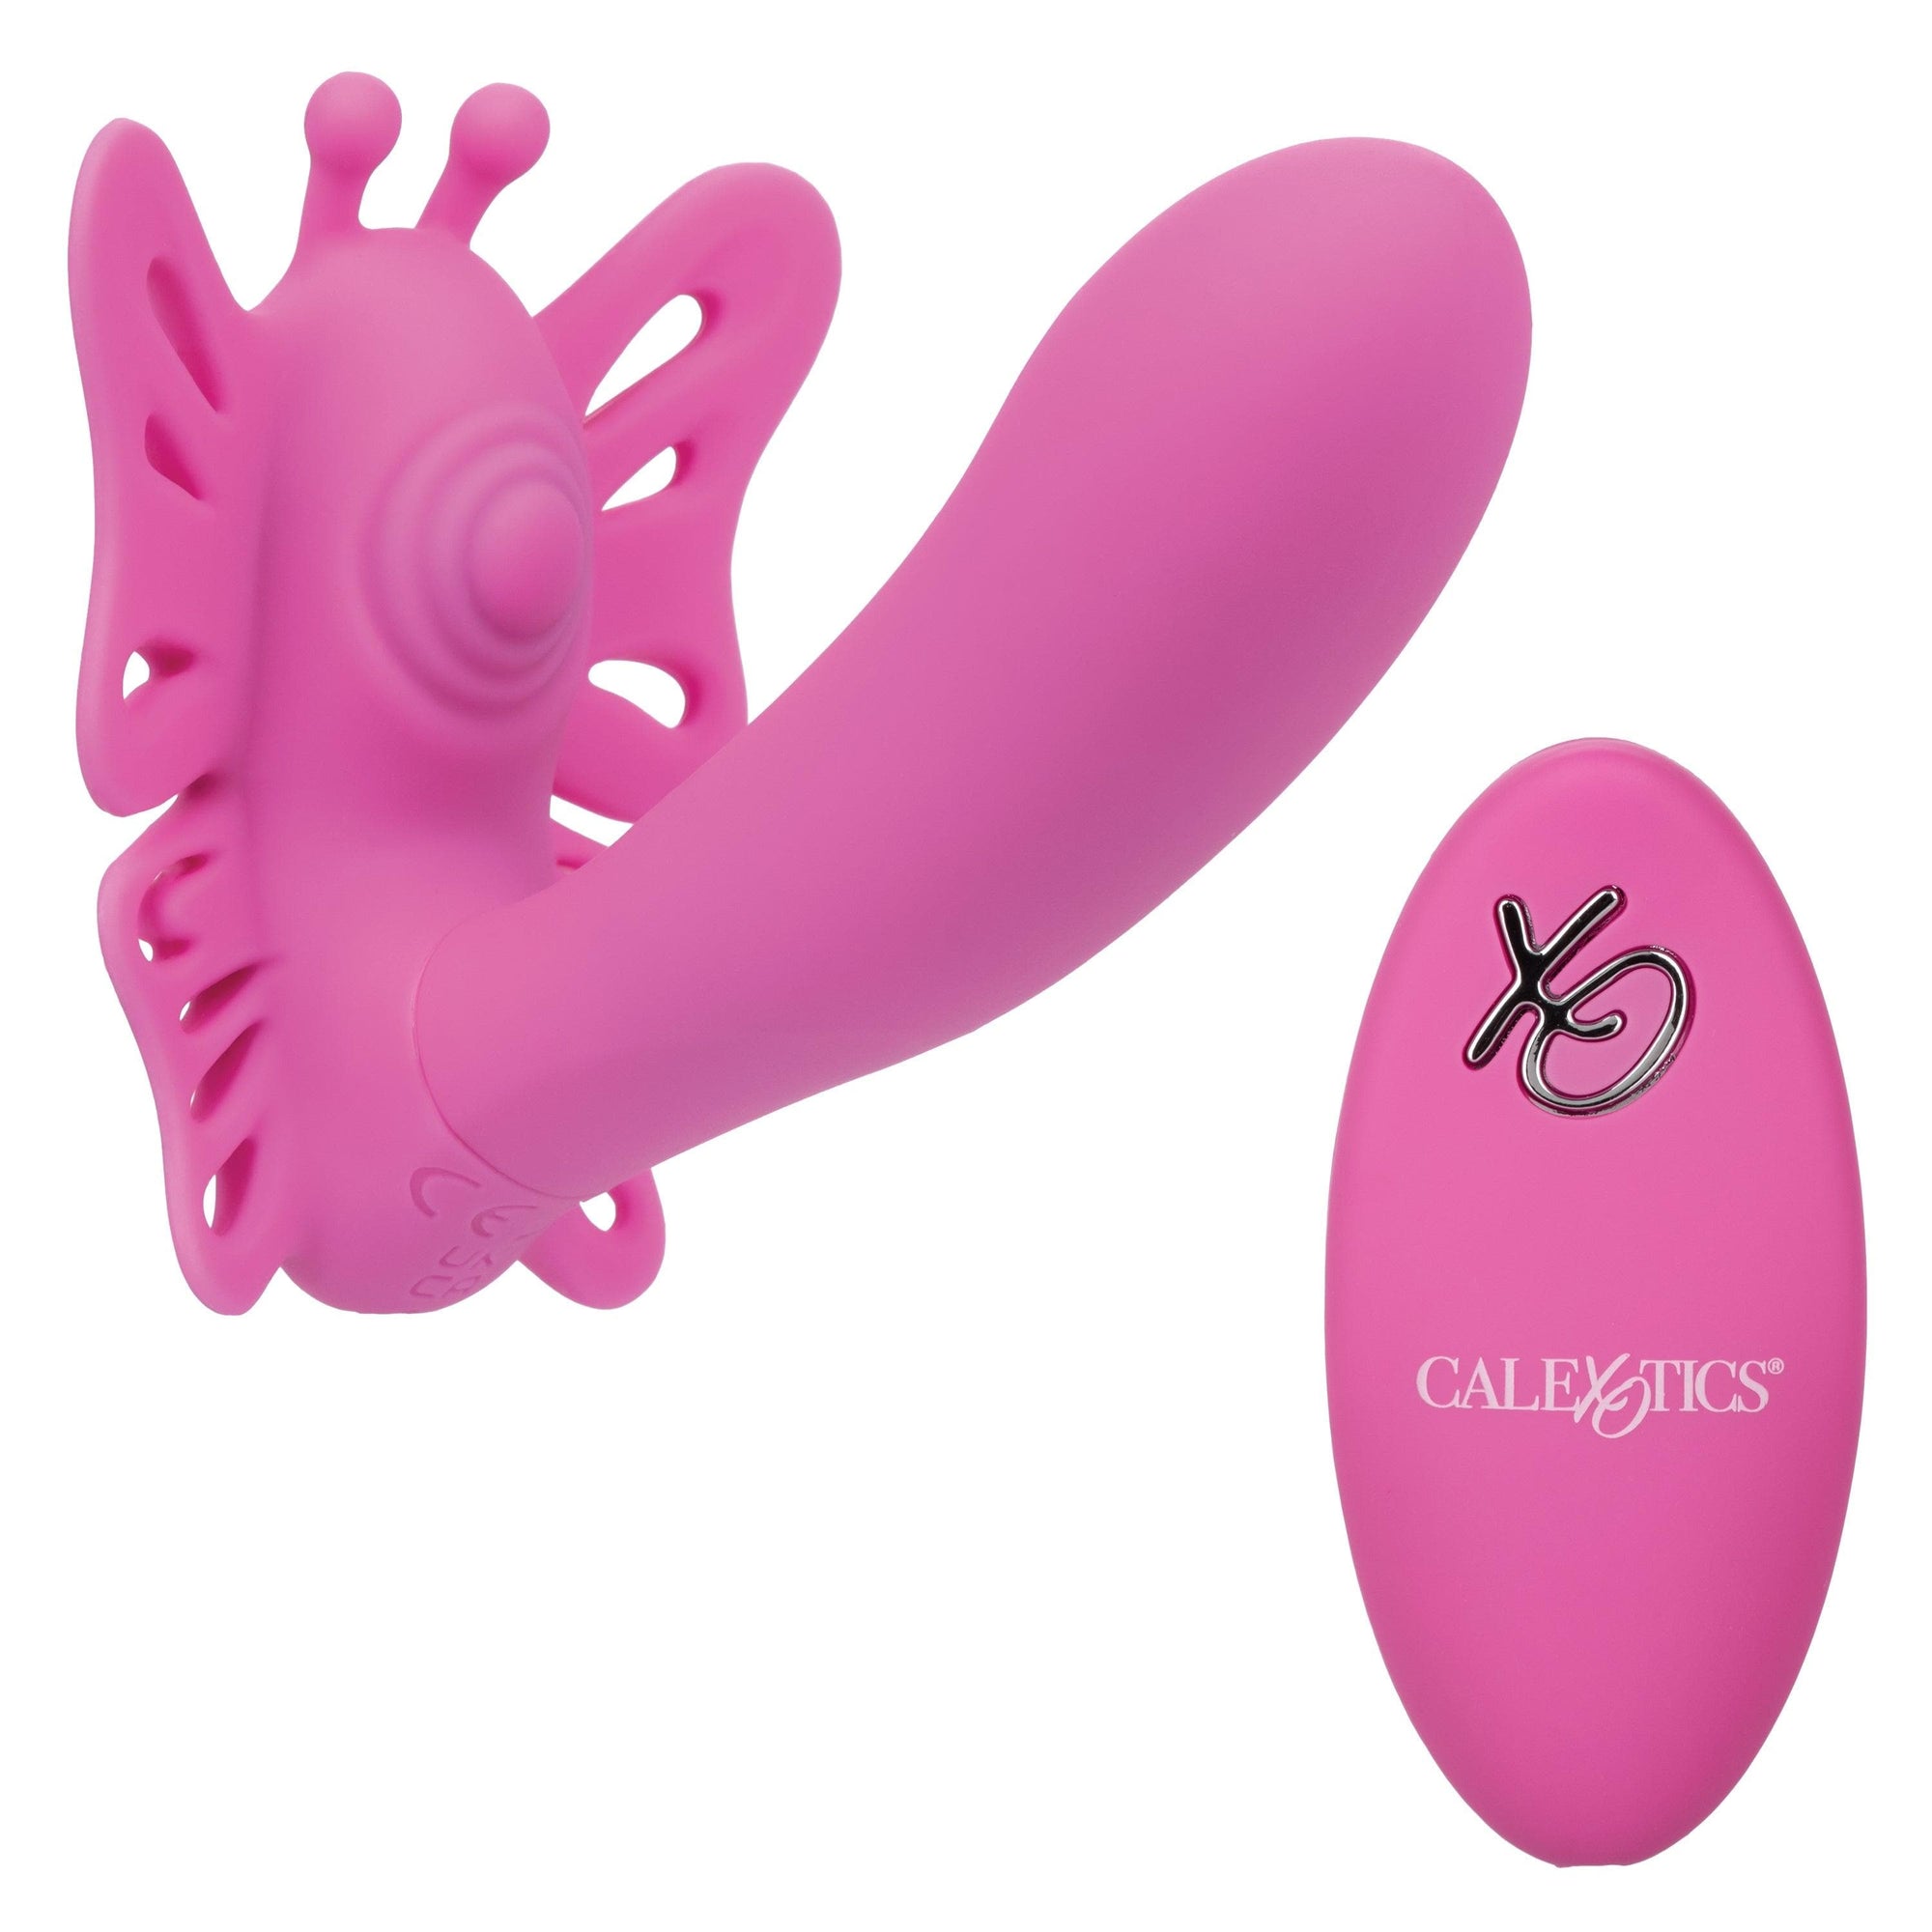 Venus Butterfly Silicone Remote Pulsating Venus G USB Rechargeable Waterproof Pink - Romantic Blessings